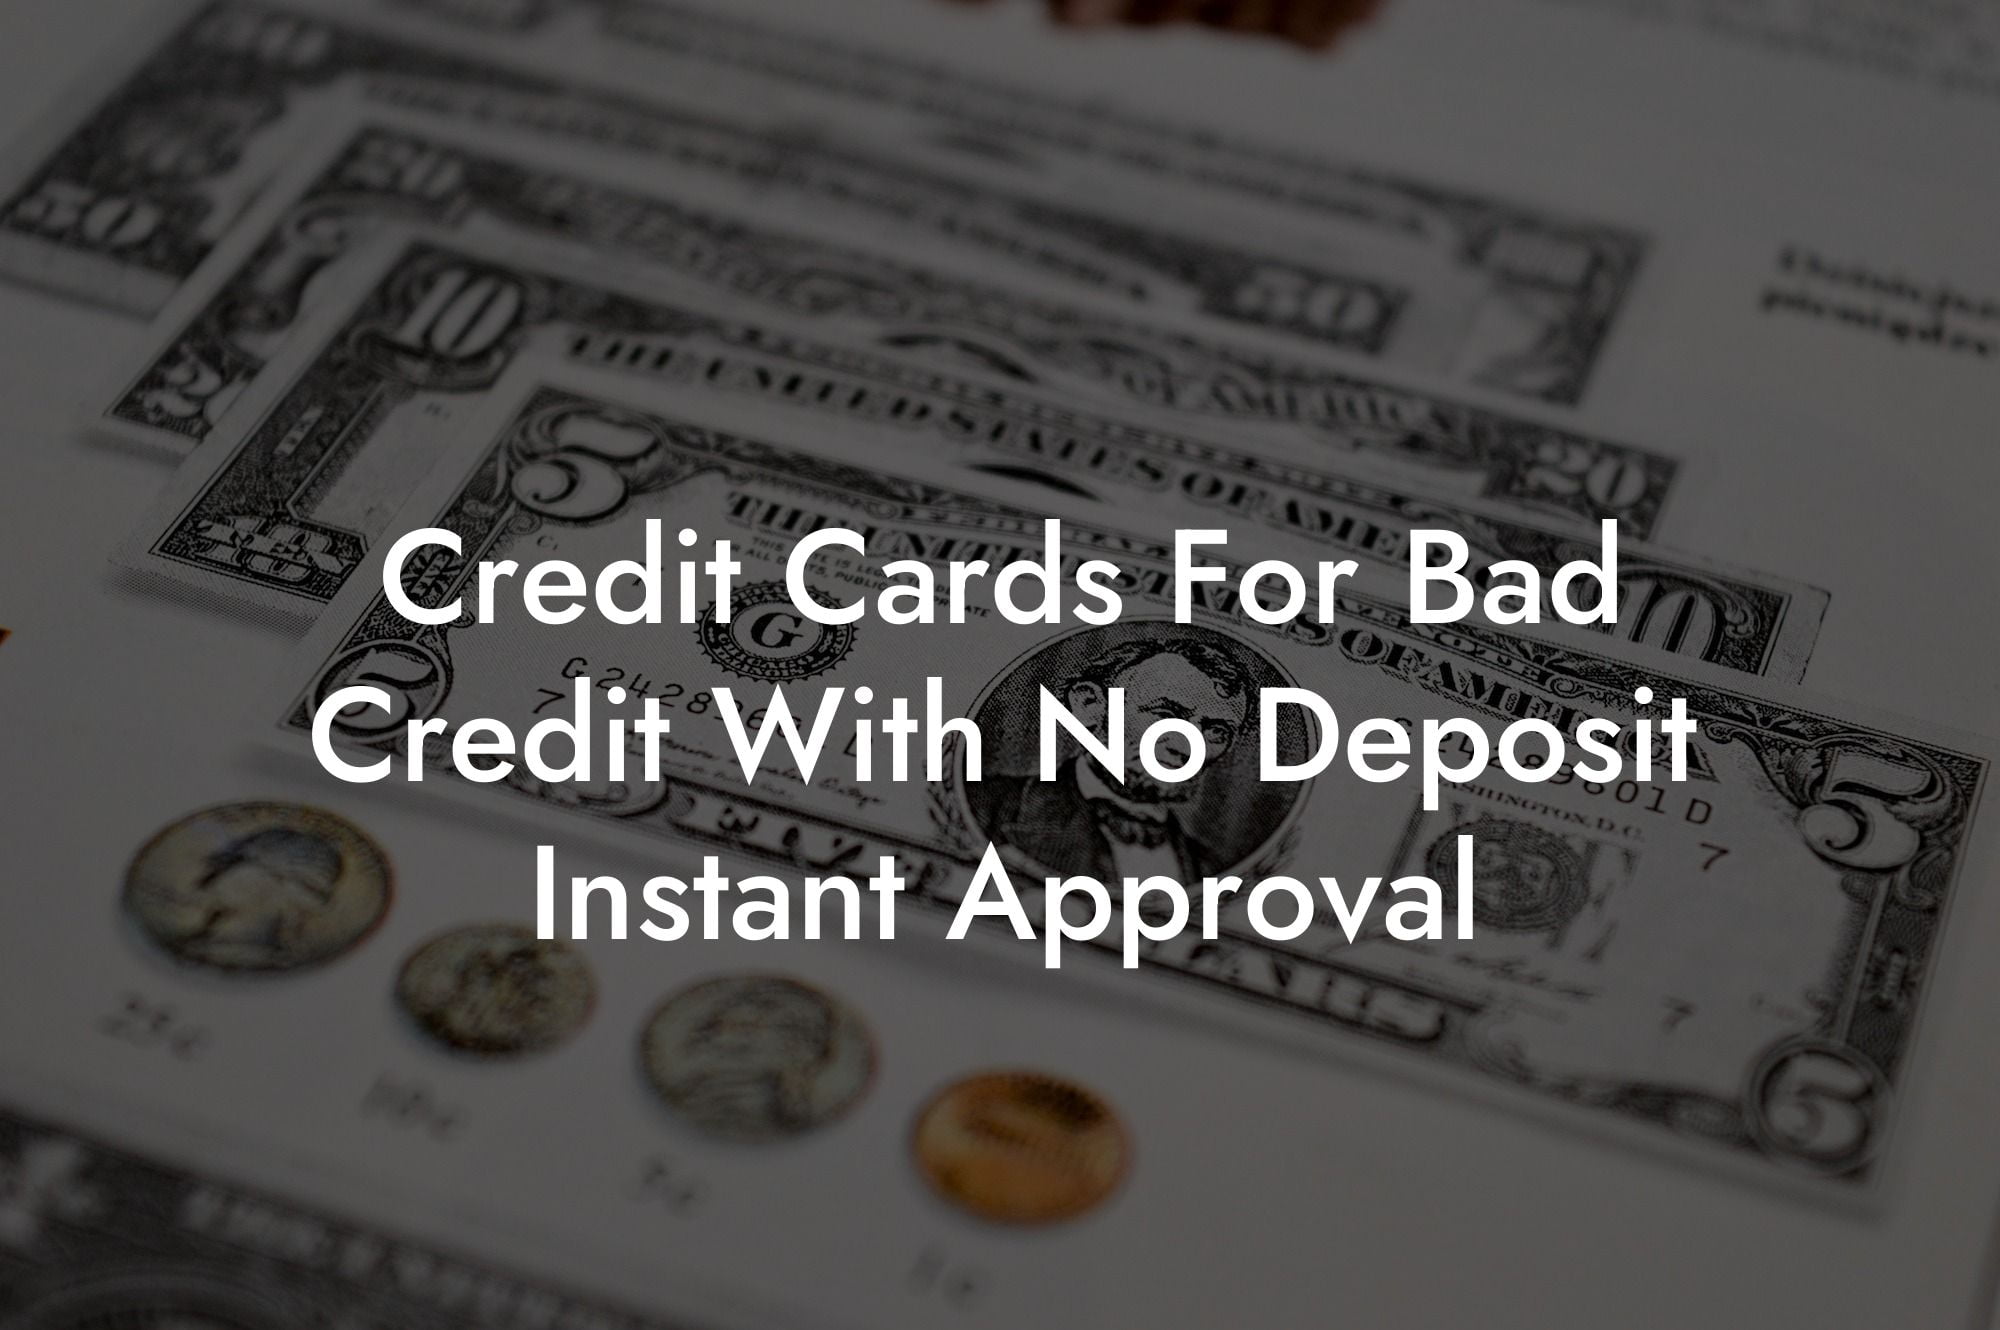 Credit Cards For Bad Credit With No Deposit Instant Approval